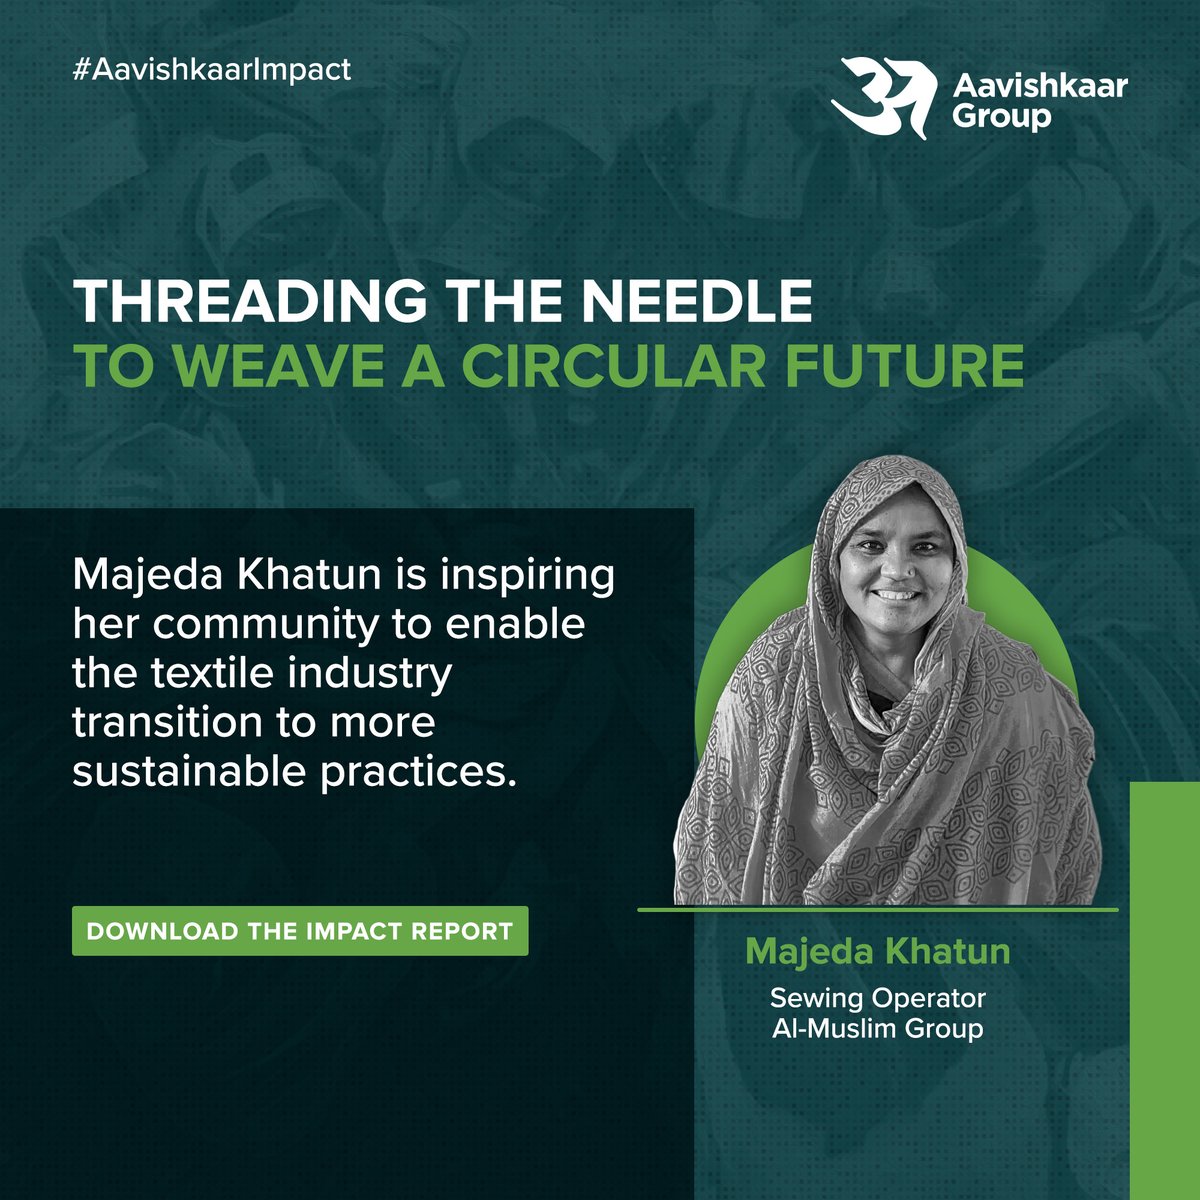 Intellecap's circularity initiative @ApparelCircular is a partner to 'Project Oporaijita' This collab has made it possible for women like Majeda & others in the RMG sector to get empowered & understand circular practices Know more aavishkaargroup.com/impact-report/ #AavishkaarImpact